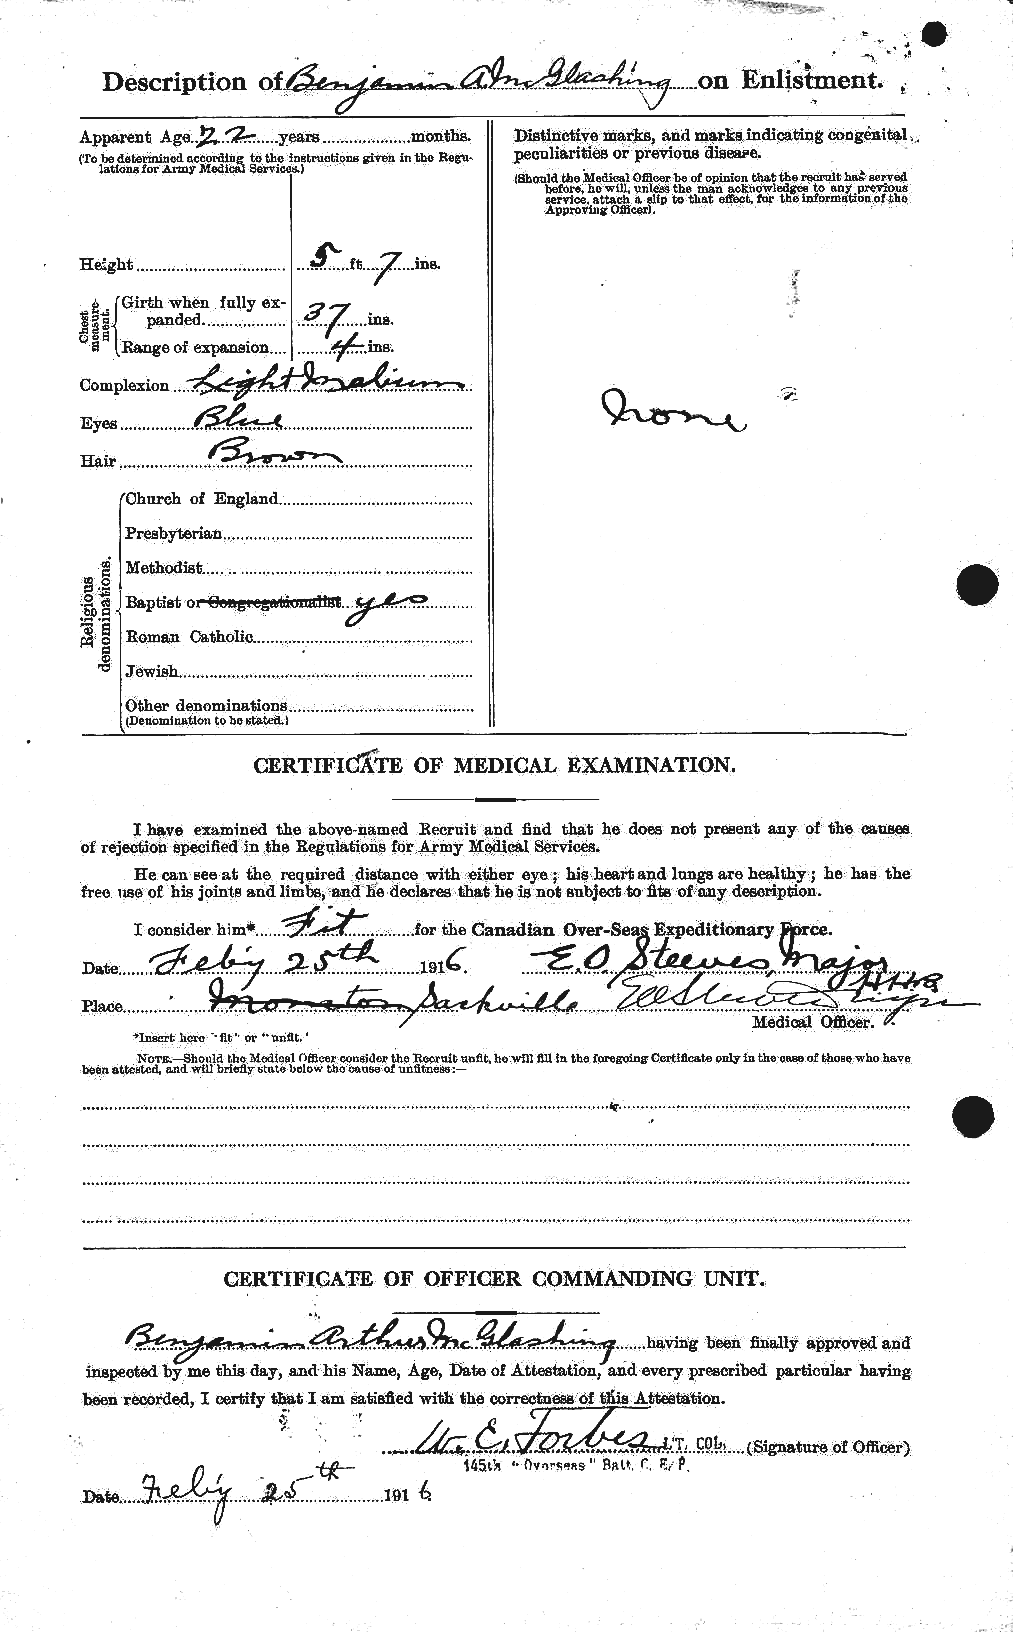 Personnel Records of the First World War - CEF 528424b